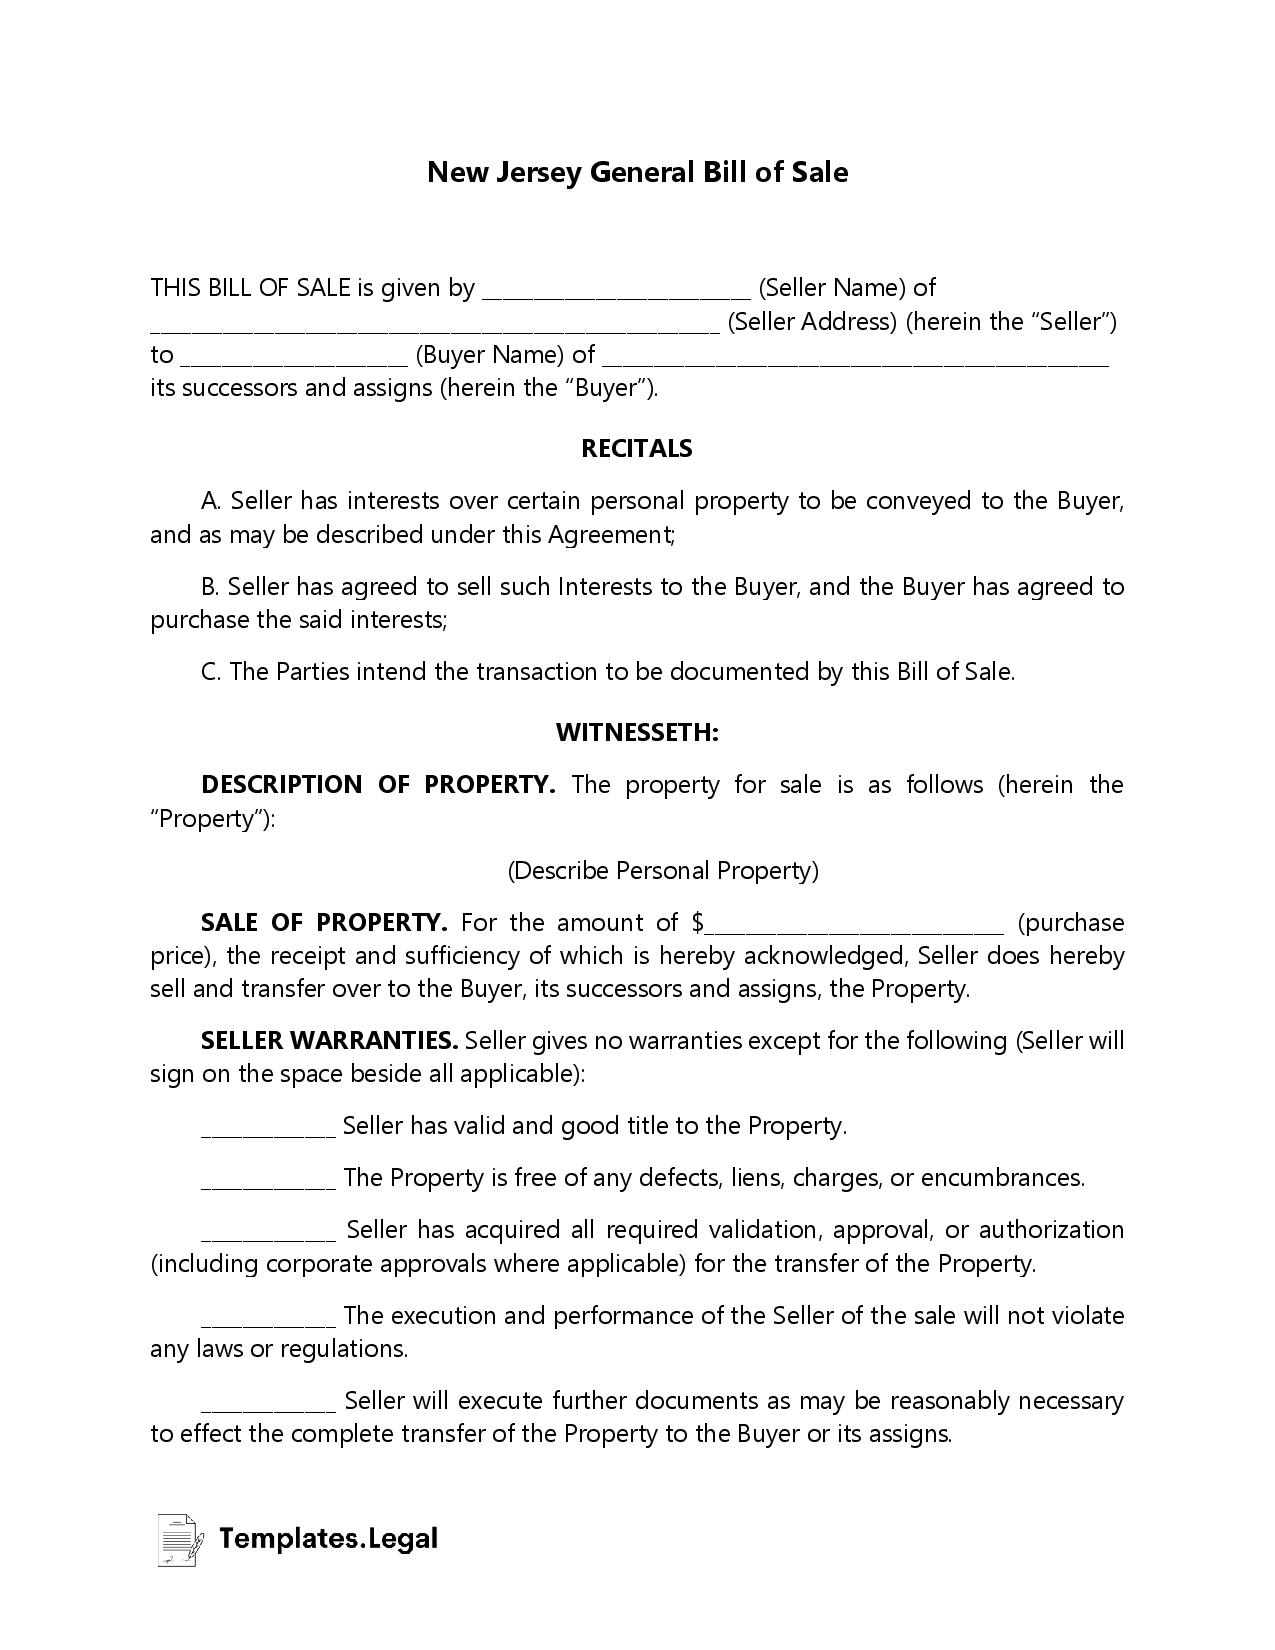 New Jersey General Bill of Sale - Templates.Legal